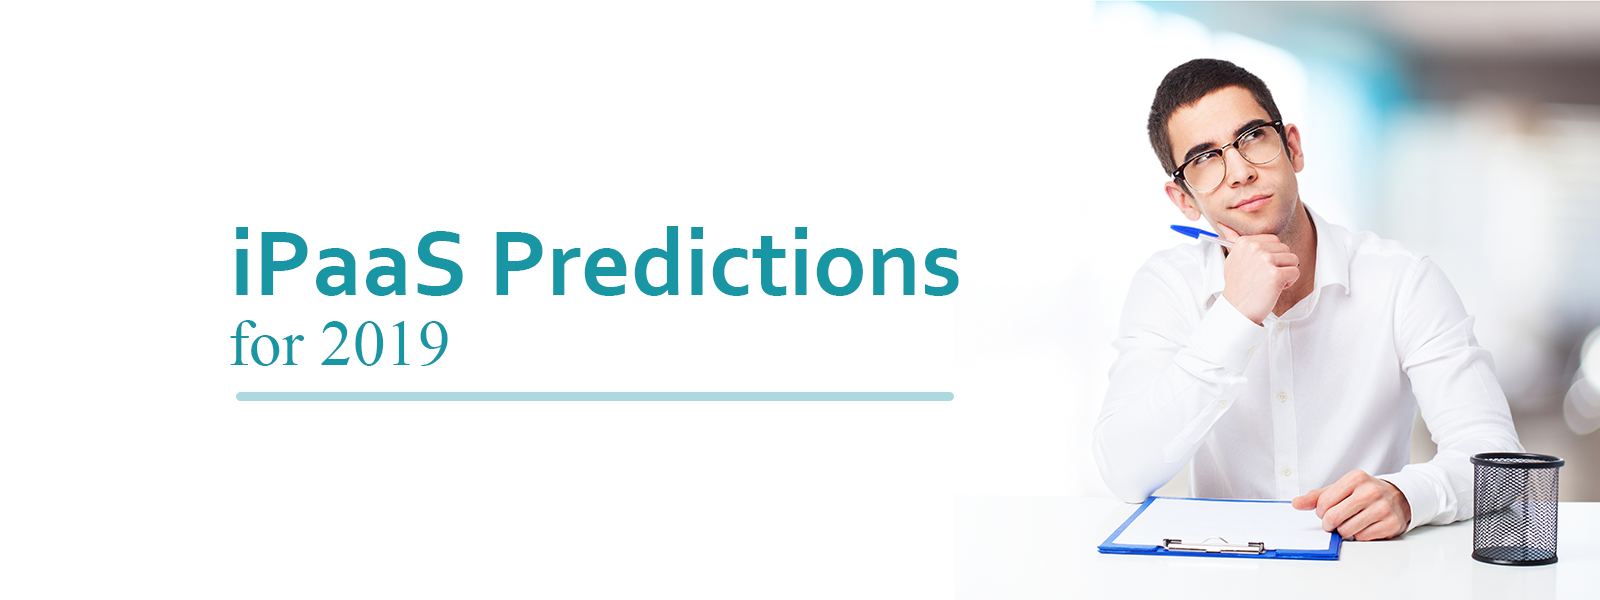 ipaas predictions for 2019